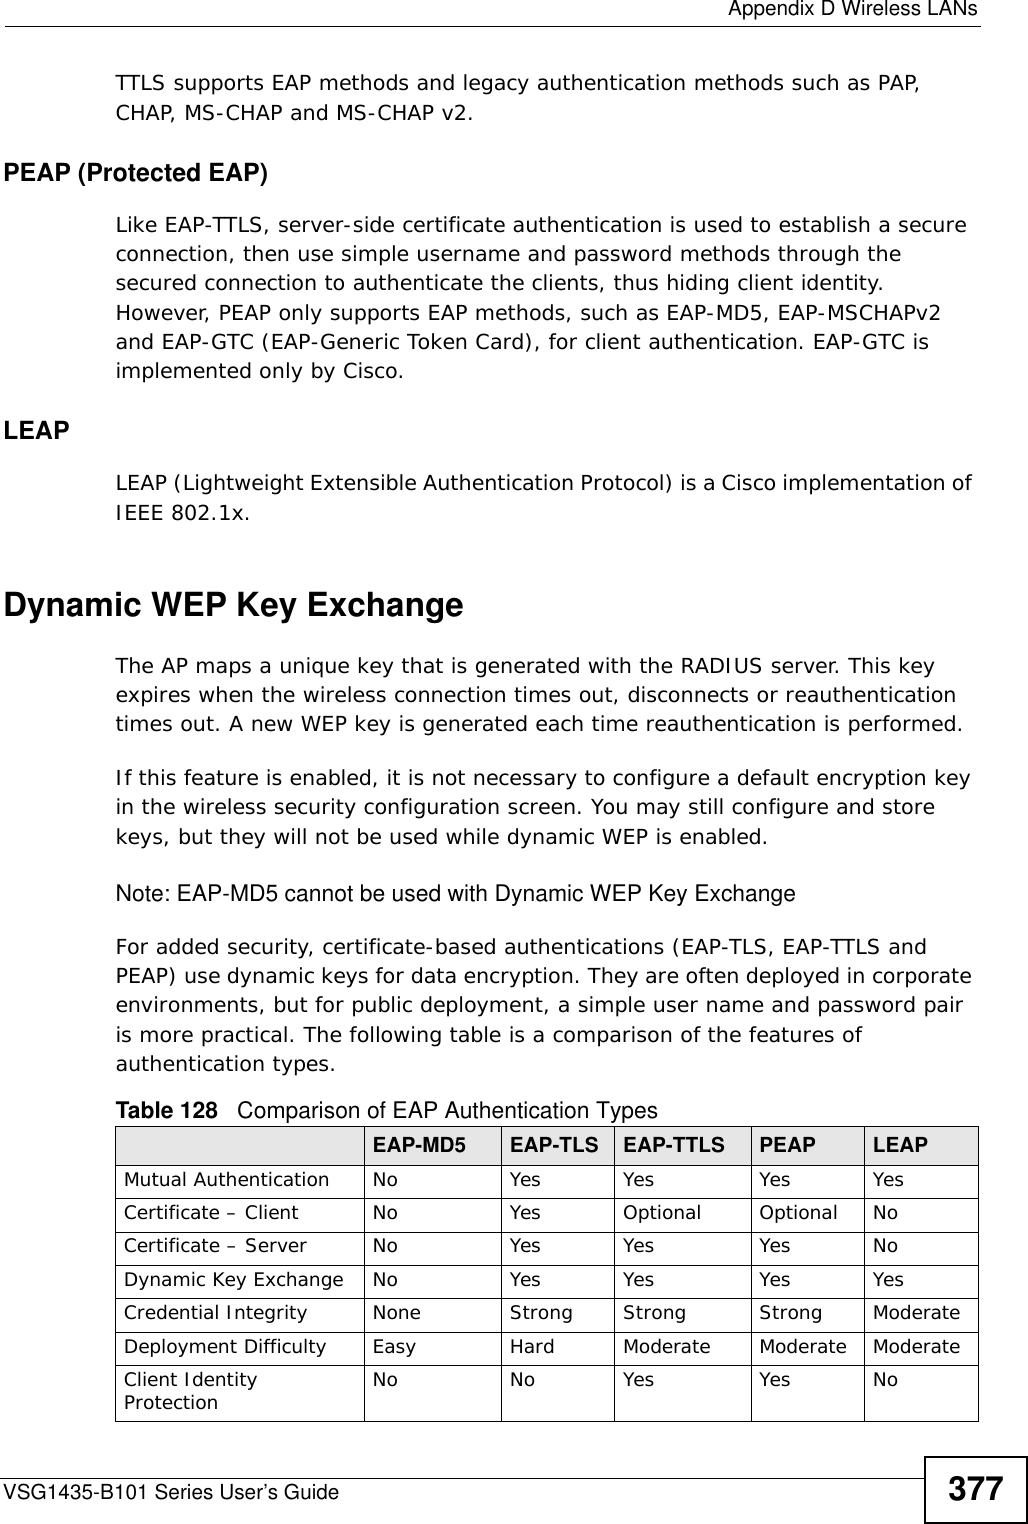  Appendix D Wireless LANsVSG1435-B101 Series User’s Guide 377TTLS supports EAP methods and legacy authentication methods such as PAP, CHAP, MS-CHAP and MS-CHAP v2. PEAP (Protected EAP)   Like EAP-TTLS, server-side certificate authentication is used to establish a secure connection, then use simple username and password methods through the secured connection to authenticate the clients, thus hiding client identity. However, PEAP only supports EAP methods, such as EAP-MD5, EAP-MSCHAPv2 and EAP-GTC (EAP-Generic Token Card), for client authentication. EAP-GTC is implemented only by Cisco.LEAPLEAP (Lightweight Extensible Authentication Protocol) is a Cisco implementation of IEEE 802.1x. Dynamic WEP Key ExchangeThe AP maps a unique key that is generated with the RADIUS server. This key expires when the wireless connection times out, disconnects or reauthentication times out. A new WEP key is generated each time reauthentication is performed.If this feature is enabled, it is not necessary to configure a default encryption key in the wireless security configuration screen. You may still configure and store keys, but they will not be used while dynamic WEP is enabled.Note: EAP-MD5 cannot be used with Dynamic WEP Key ExchangeFor added security, certificate-based authentications (EAP-TLS, EAP-TTLS and PEAP) use dynamic keys for data encryption. They are often deployed in corporate environments, but for public deployment, a simple user name and password pair is more practical. The following table is a comparison of the features of authentication types.Table 128   Comparison of EAP Authentication TypesEAP-MD5 EAP-TLS EAP-TTLS PEAP LEAPMutual Authentication No Yes Yes Yes YesCertificate – Client No Yes Optional Optional NoCertificate – Server No Yes Yes Yes NoDynamic Key Exchange No Yes Yes Yes YesCredential Integrity None Strong Strong Strong ModerateDeployment Difficulty Easy Hard Moderate Moderate ModerateClient Identity Protection No No Yes Yes No